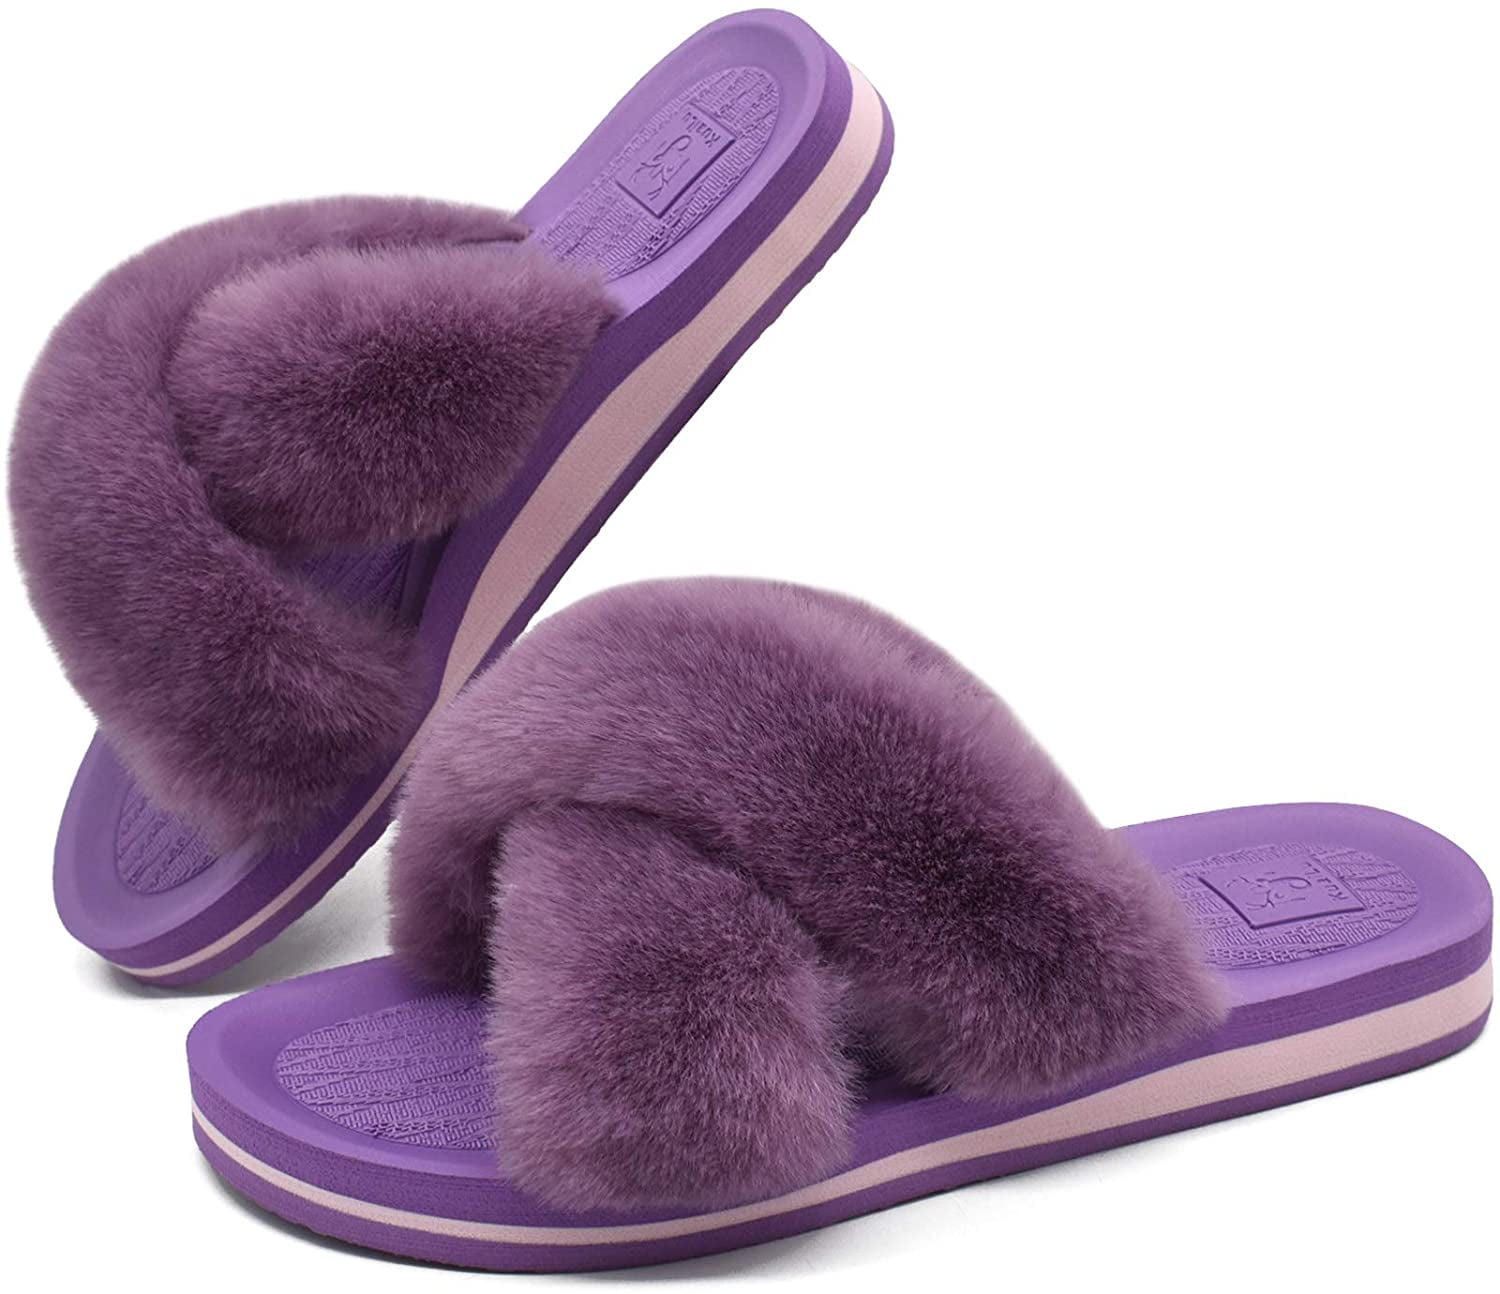 KuaiLu Womens Fluffy Faux Fur Sliders Open Toe Fuzzy Plush Cosy House Slippers Ladies Non-Slip Hard Rubber Sole Flip Flops with Arch Support 